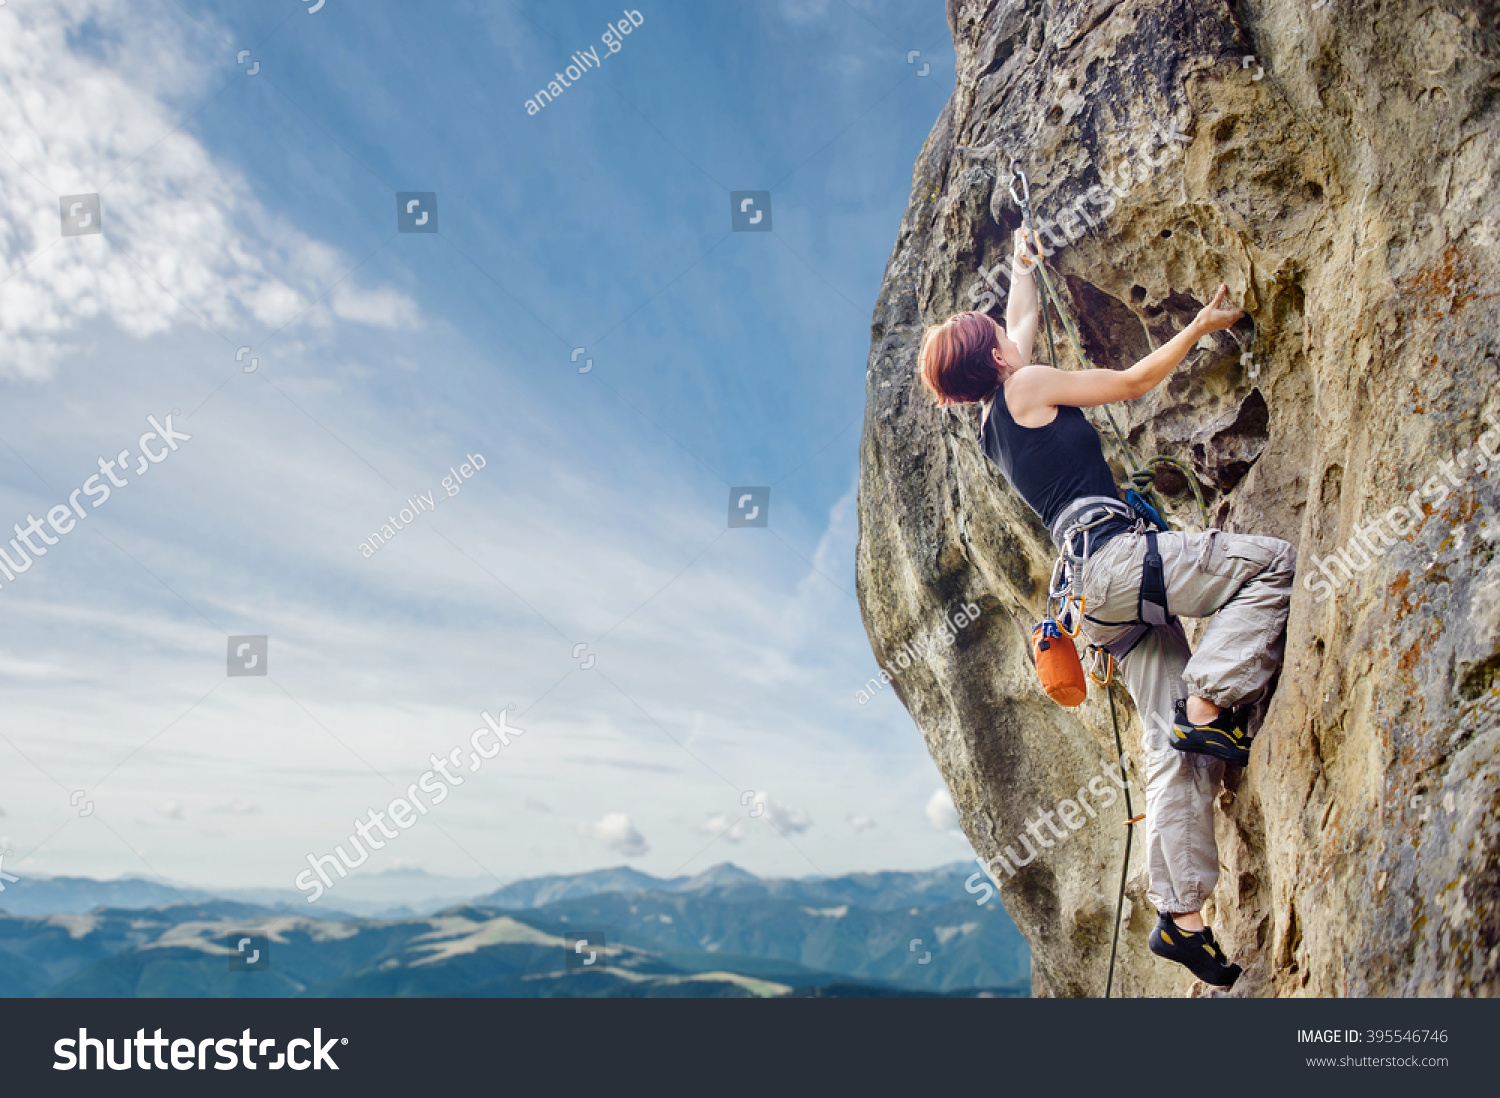 Rear view of young female climber climbing with rope and carbines, looking for next grip on a big rocky wall against blue sky and mountains. Summer time. Climbing equipment #395546746